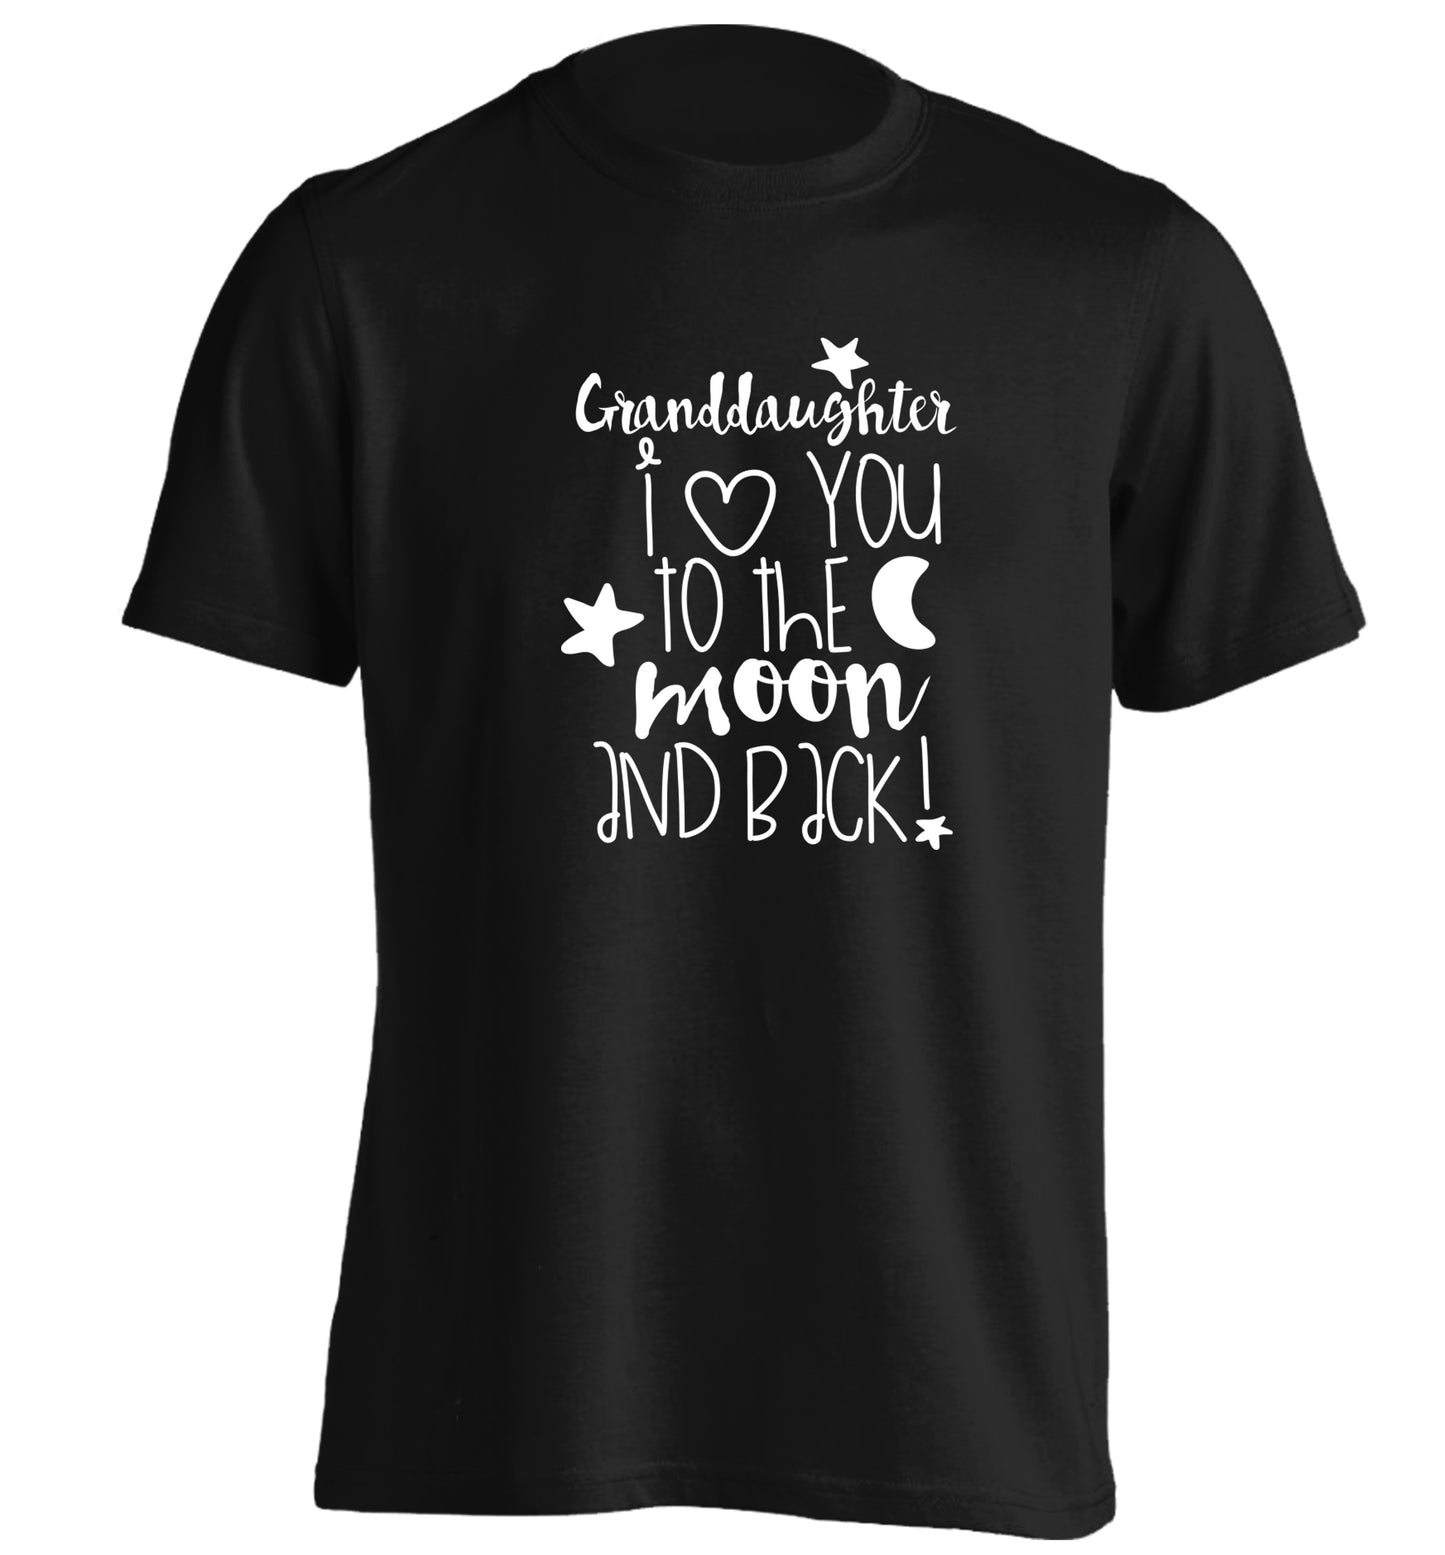 Granddaughter I love you to the moon and back adults unisex black Tshirt 2XL